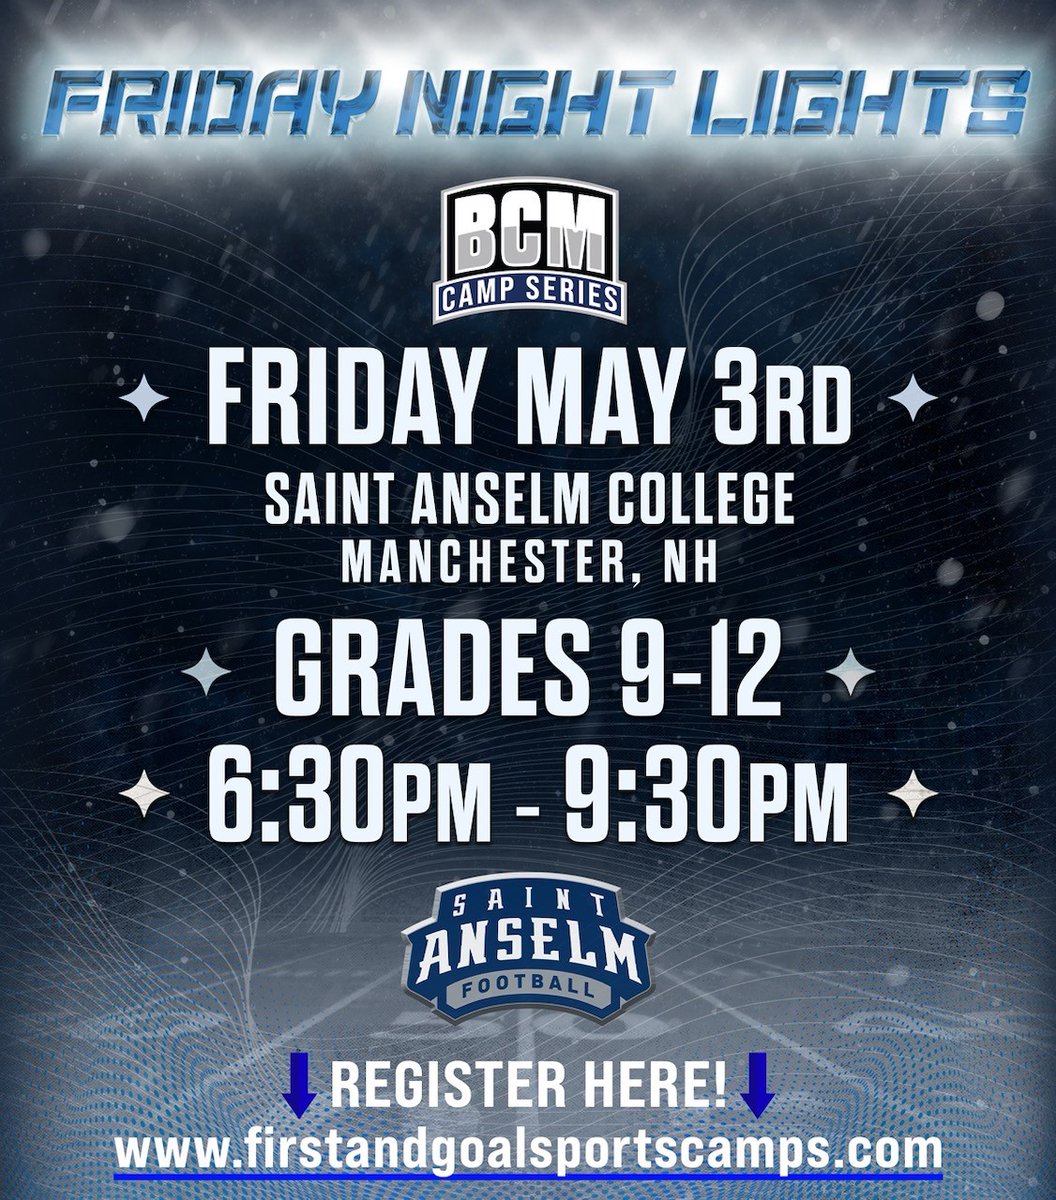 Instead of going 'On the Road' in New England, we are bringing the talent to Grappone Stadium for a one night audition under the lights. We are just days away from putting competition and skill to the test. That's the #BCM way. firstandgoalsportscamps.com